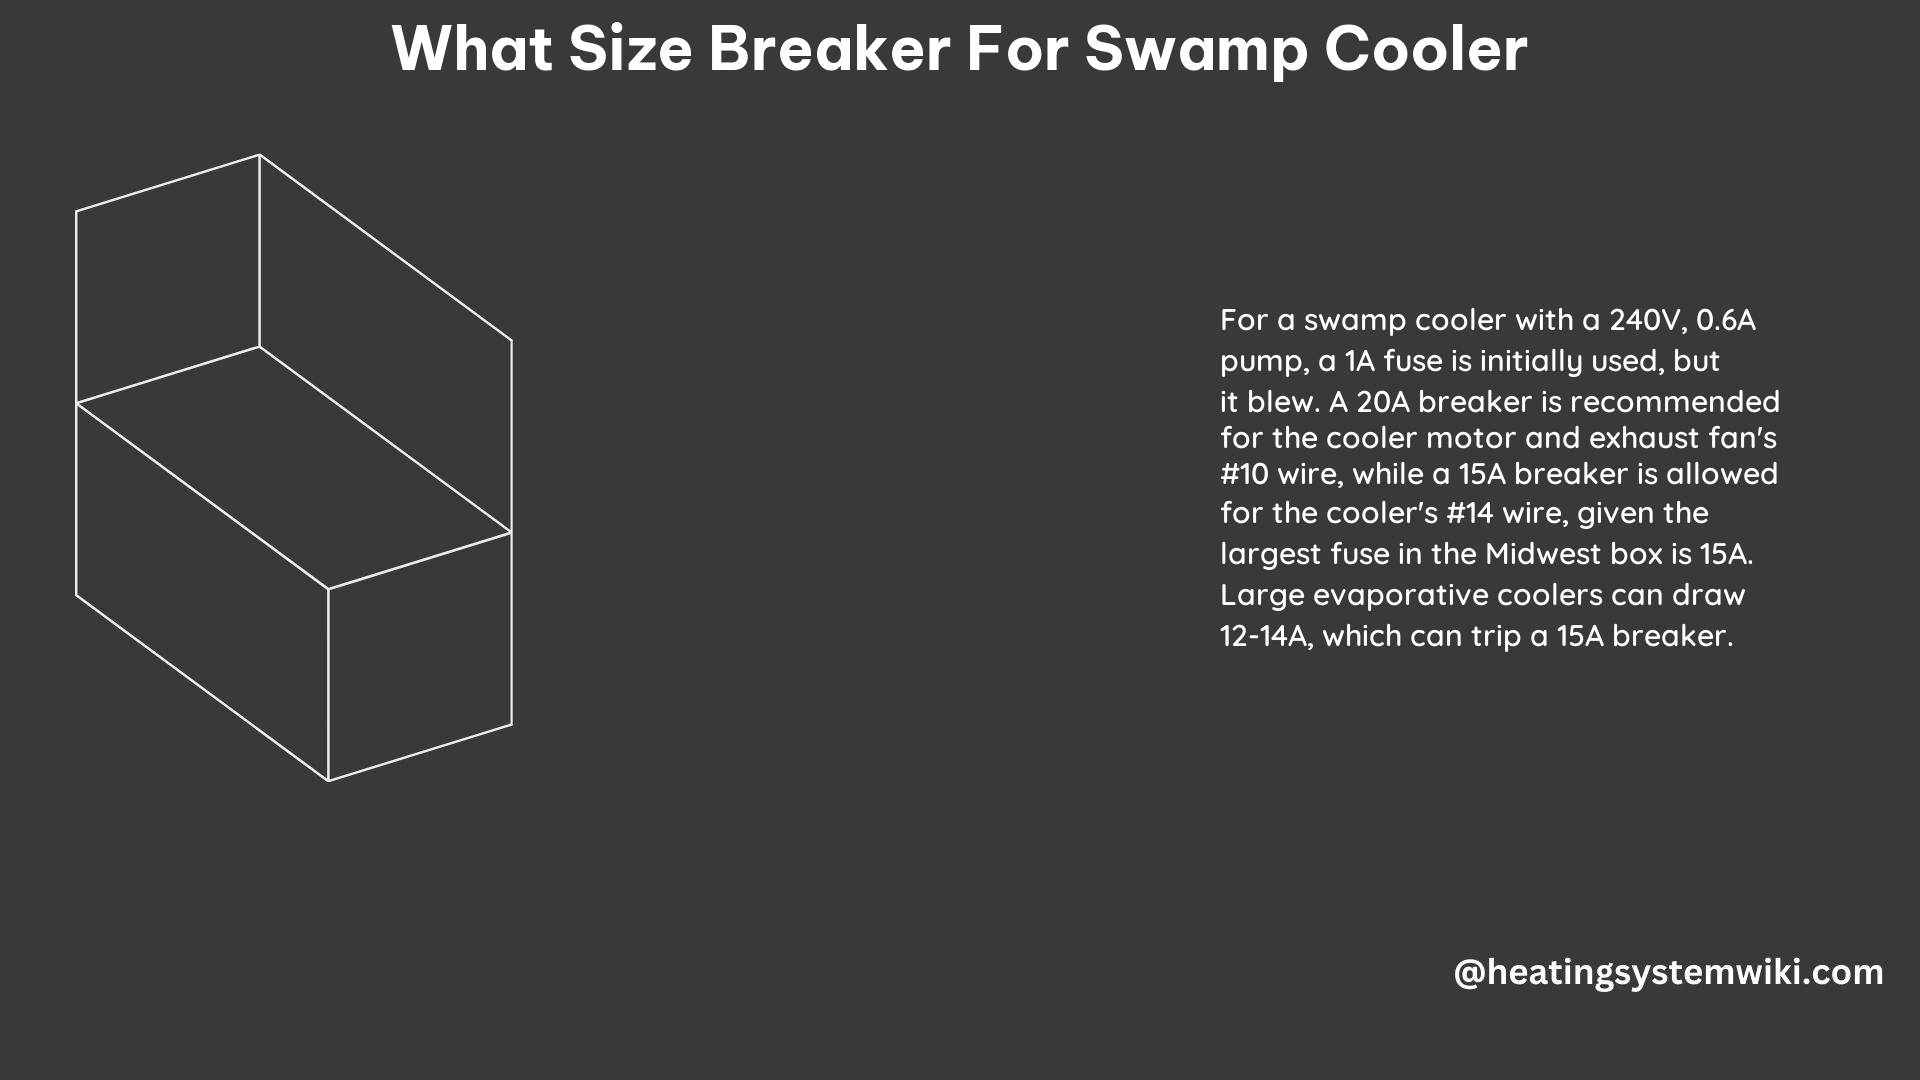 What Size Breaker for Swamp Cooler